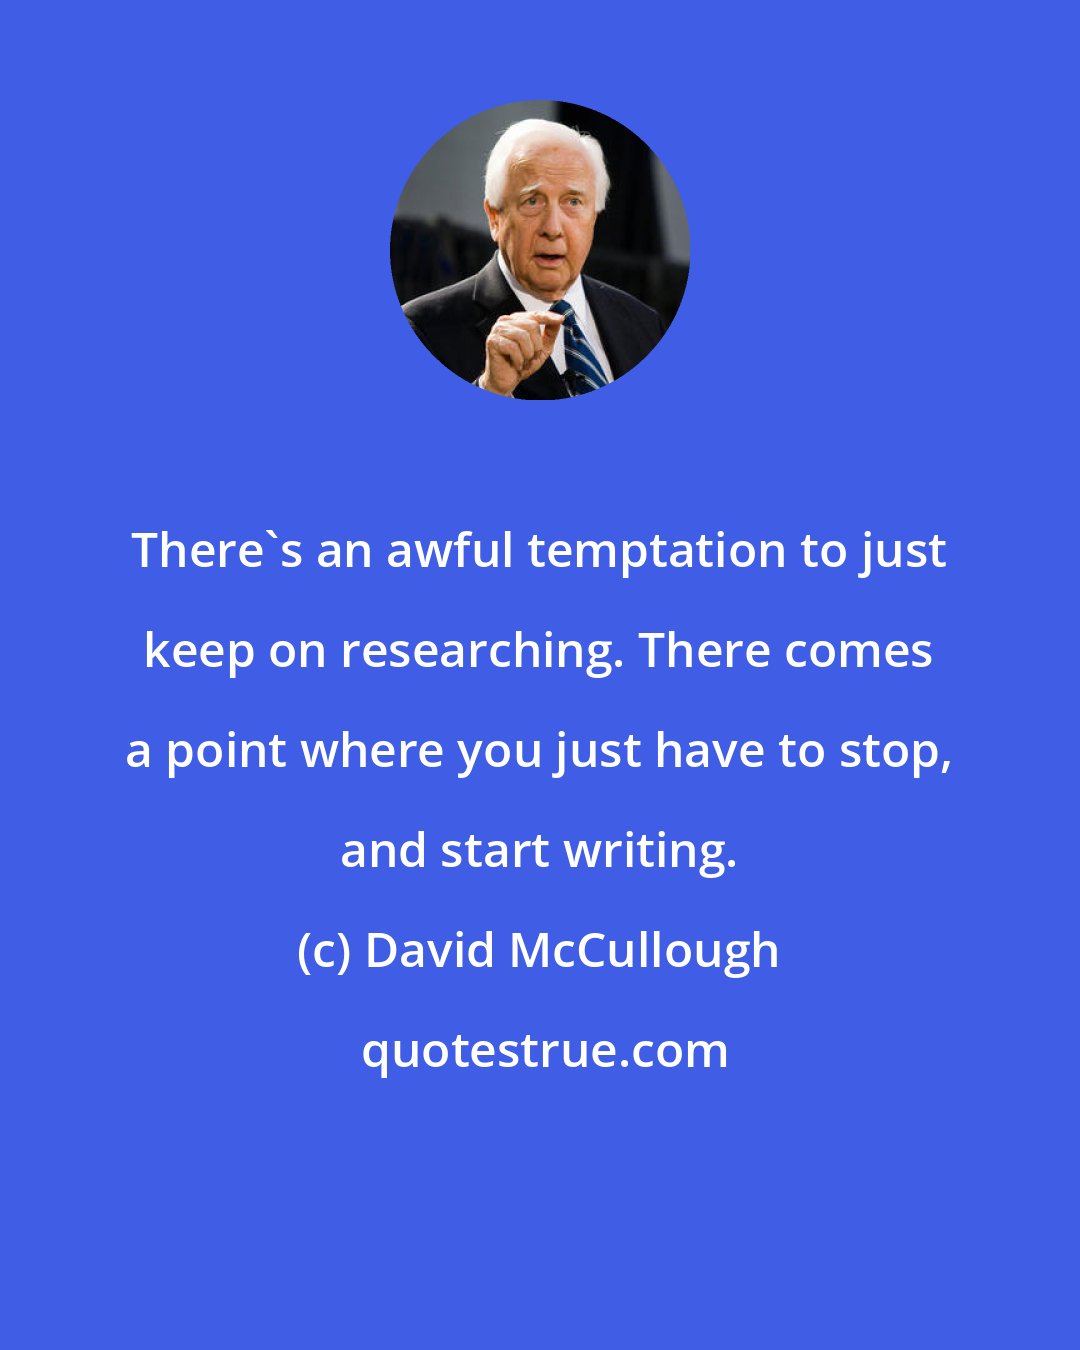 David McCullough: There's an awful temptation to just keep on researching. There comes a point where you just have to stop, and start writing.